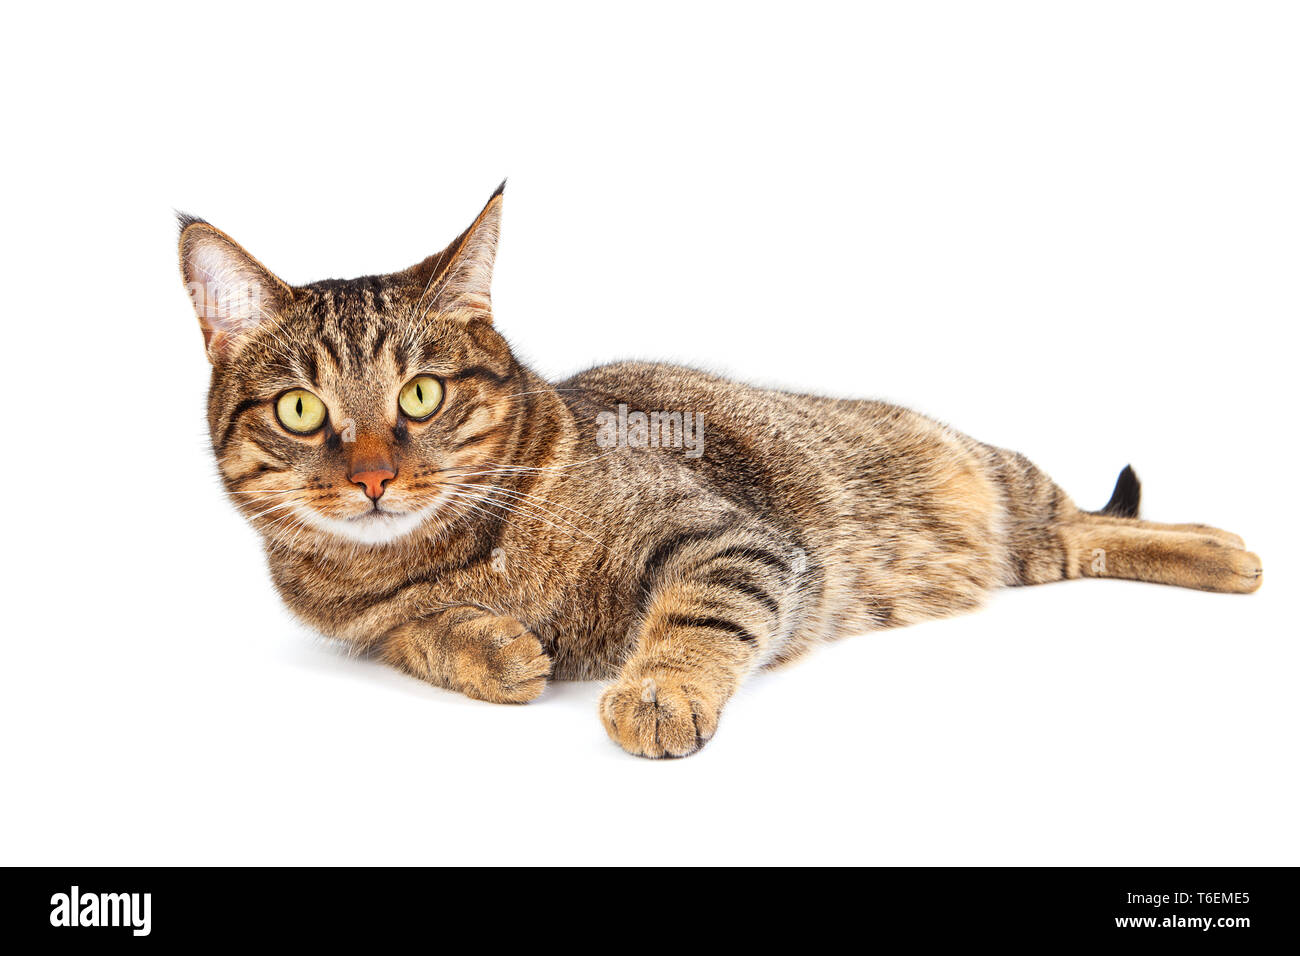 Tabby cat with yellow eyes Stock Photo